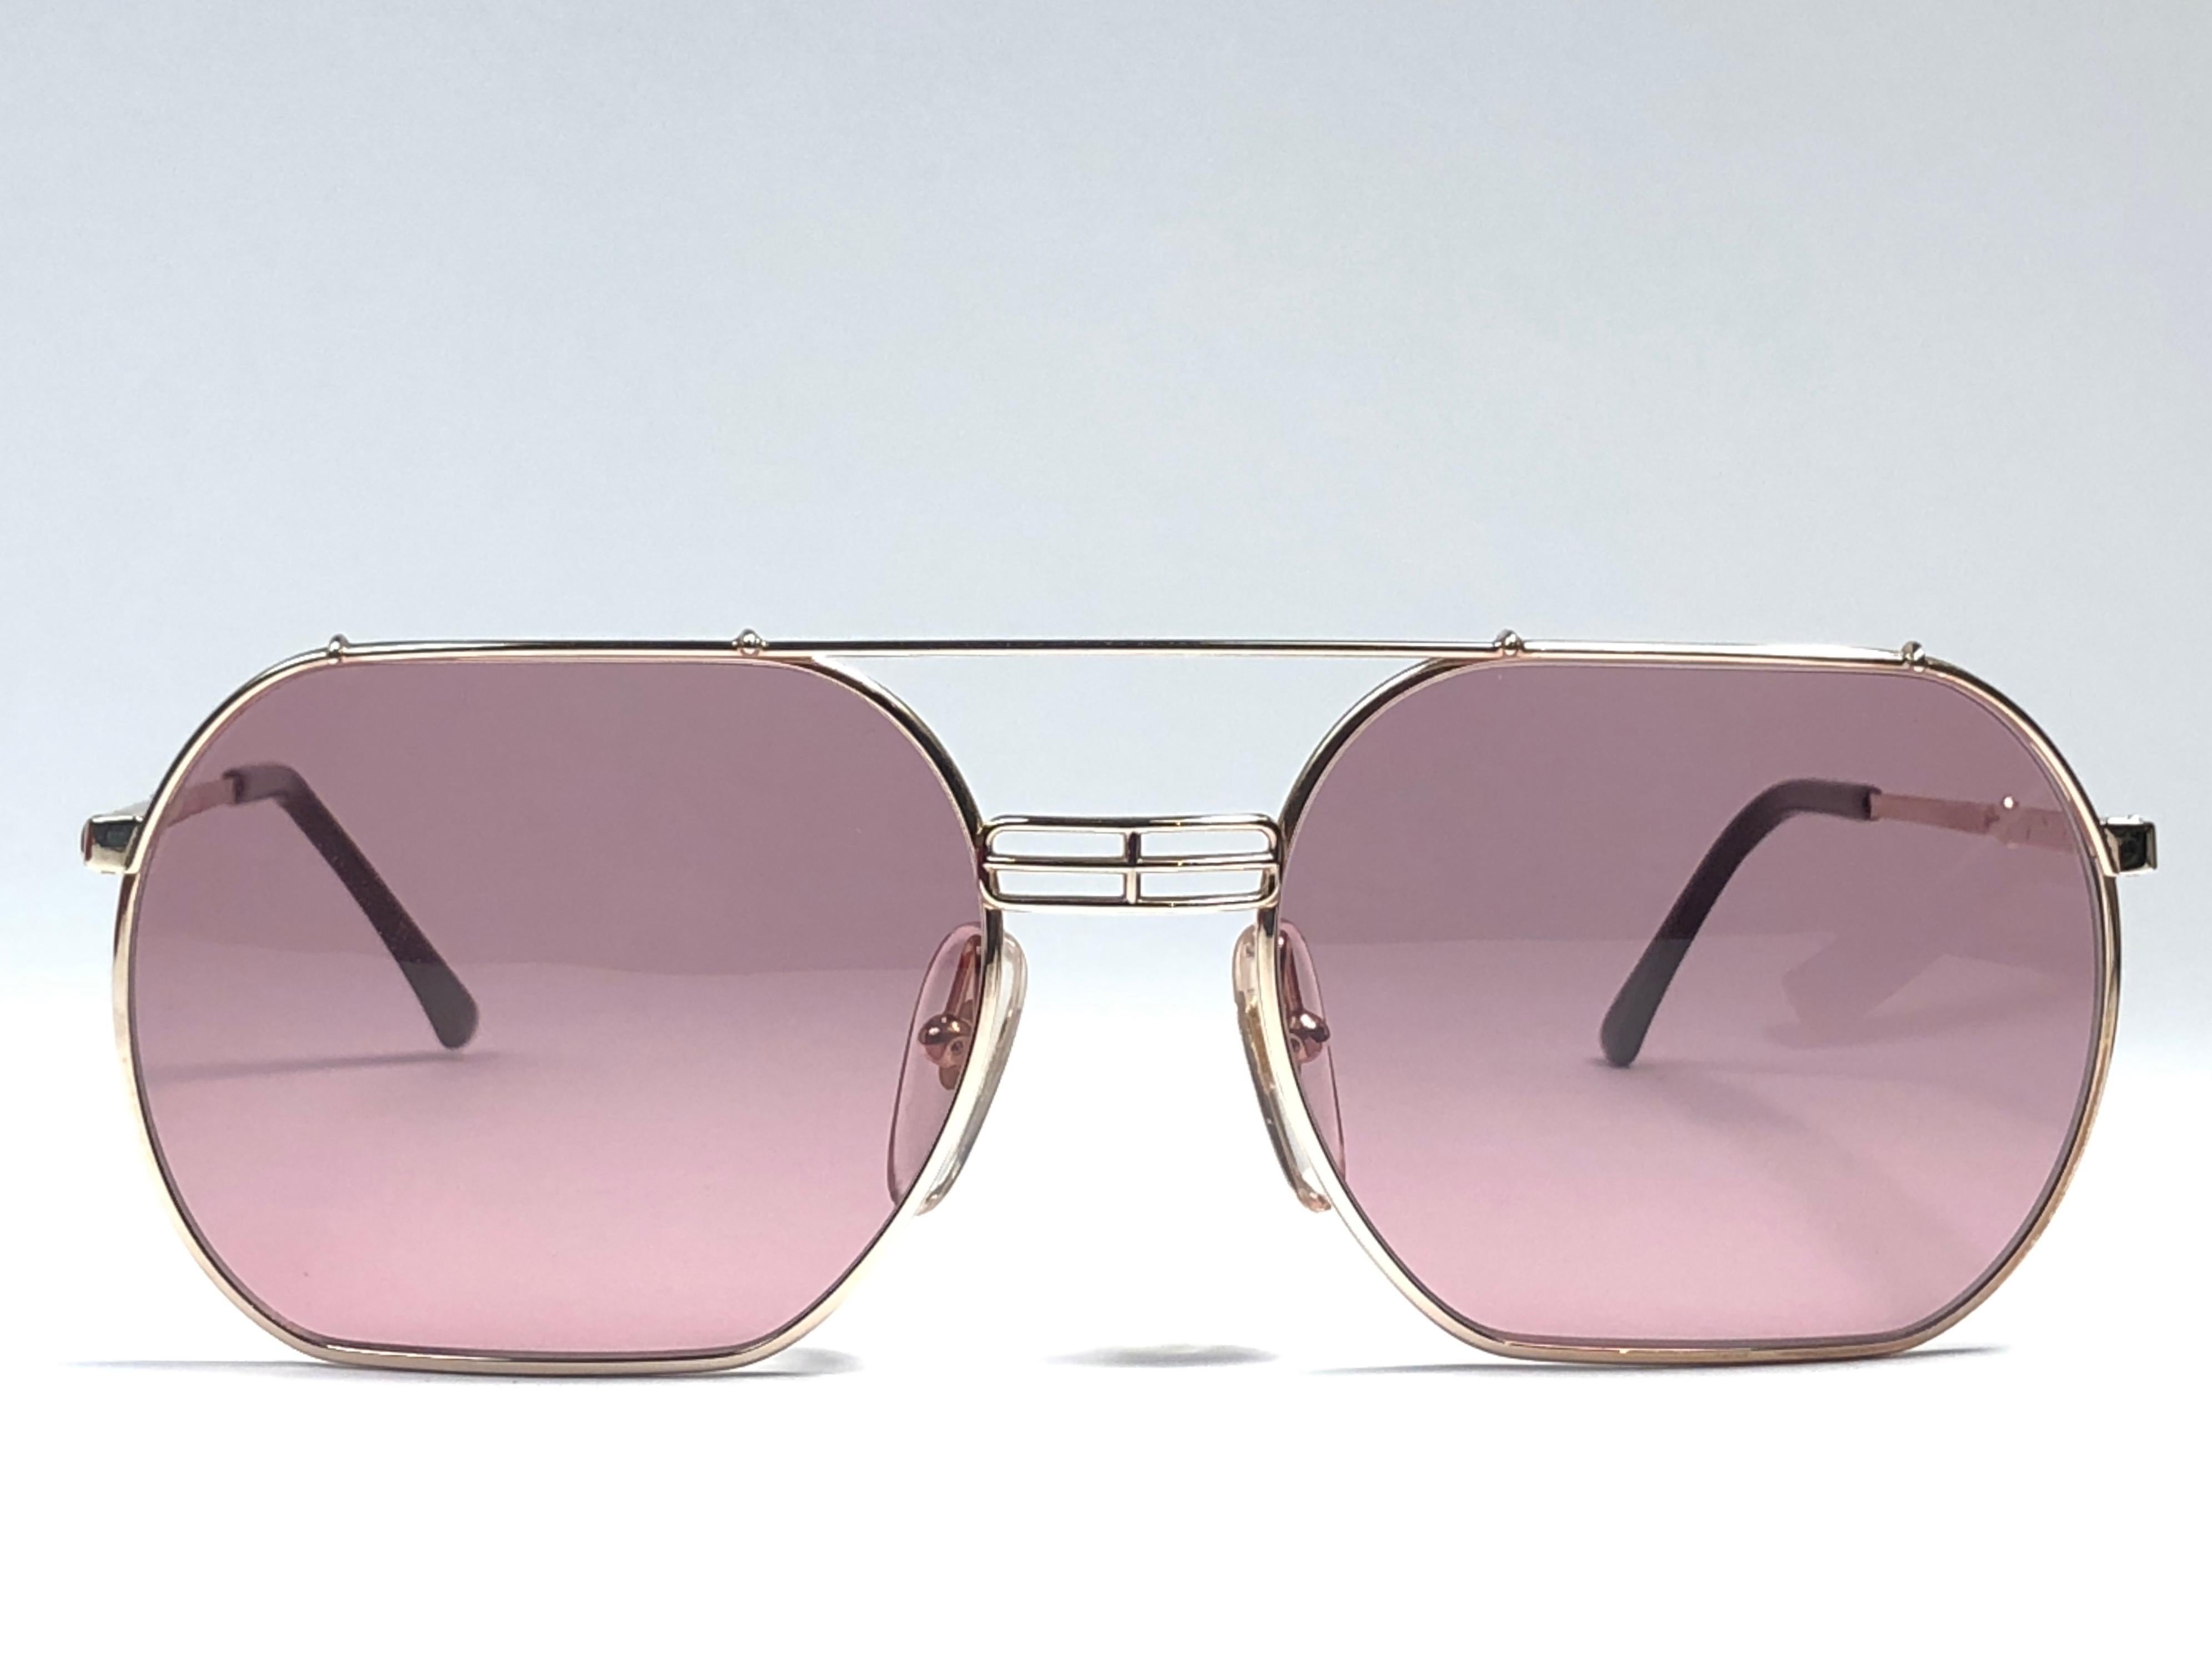 New vintage Christian Dior Monsieur Silver 2363 sunglasses. .

Spotless medium rose lenses.

Comes with it original CD Monsieur sleeve.

New, never worn or displayed this item may show light sign of wear due to storage.

Made in Austria